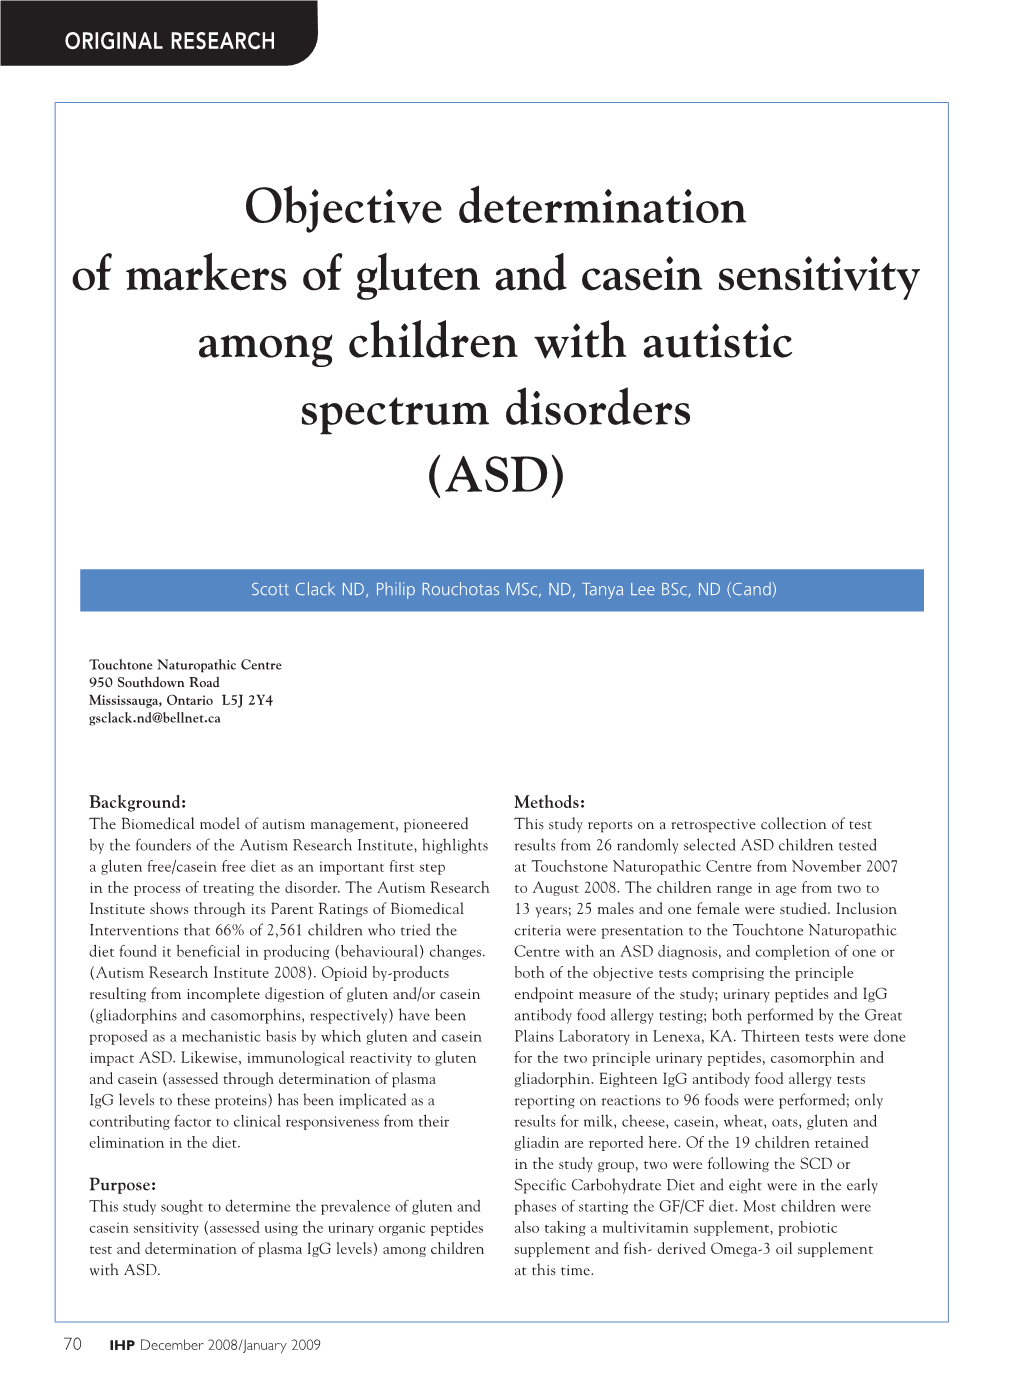 Objective Determination of Markers of Gluten and Casein Sensitivity Among Children with Autistic Spectrum Disorders (AS D)